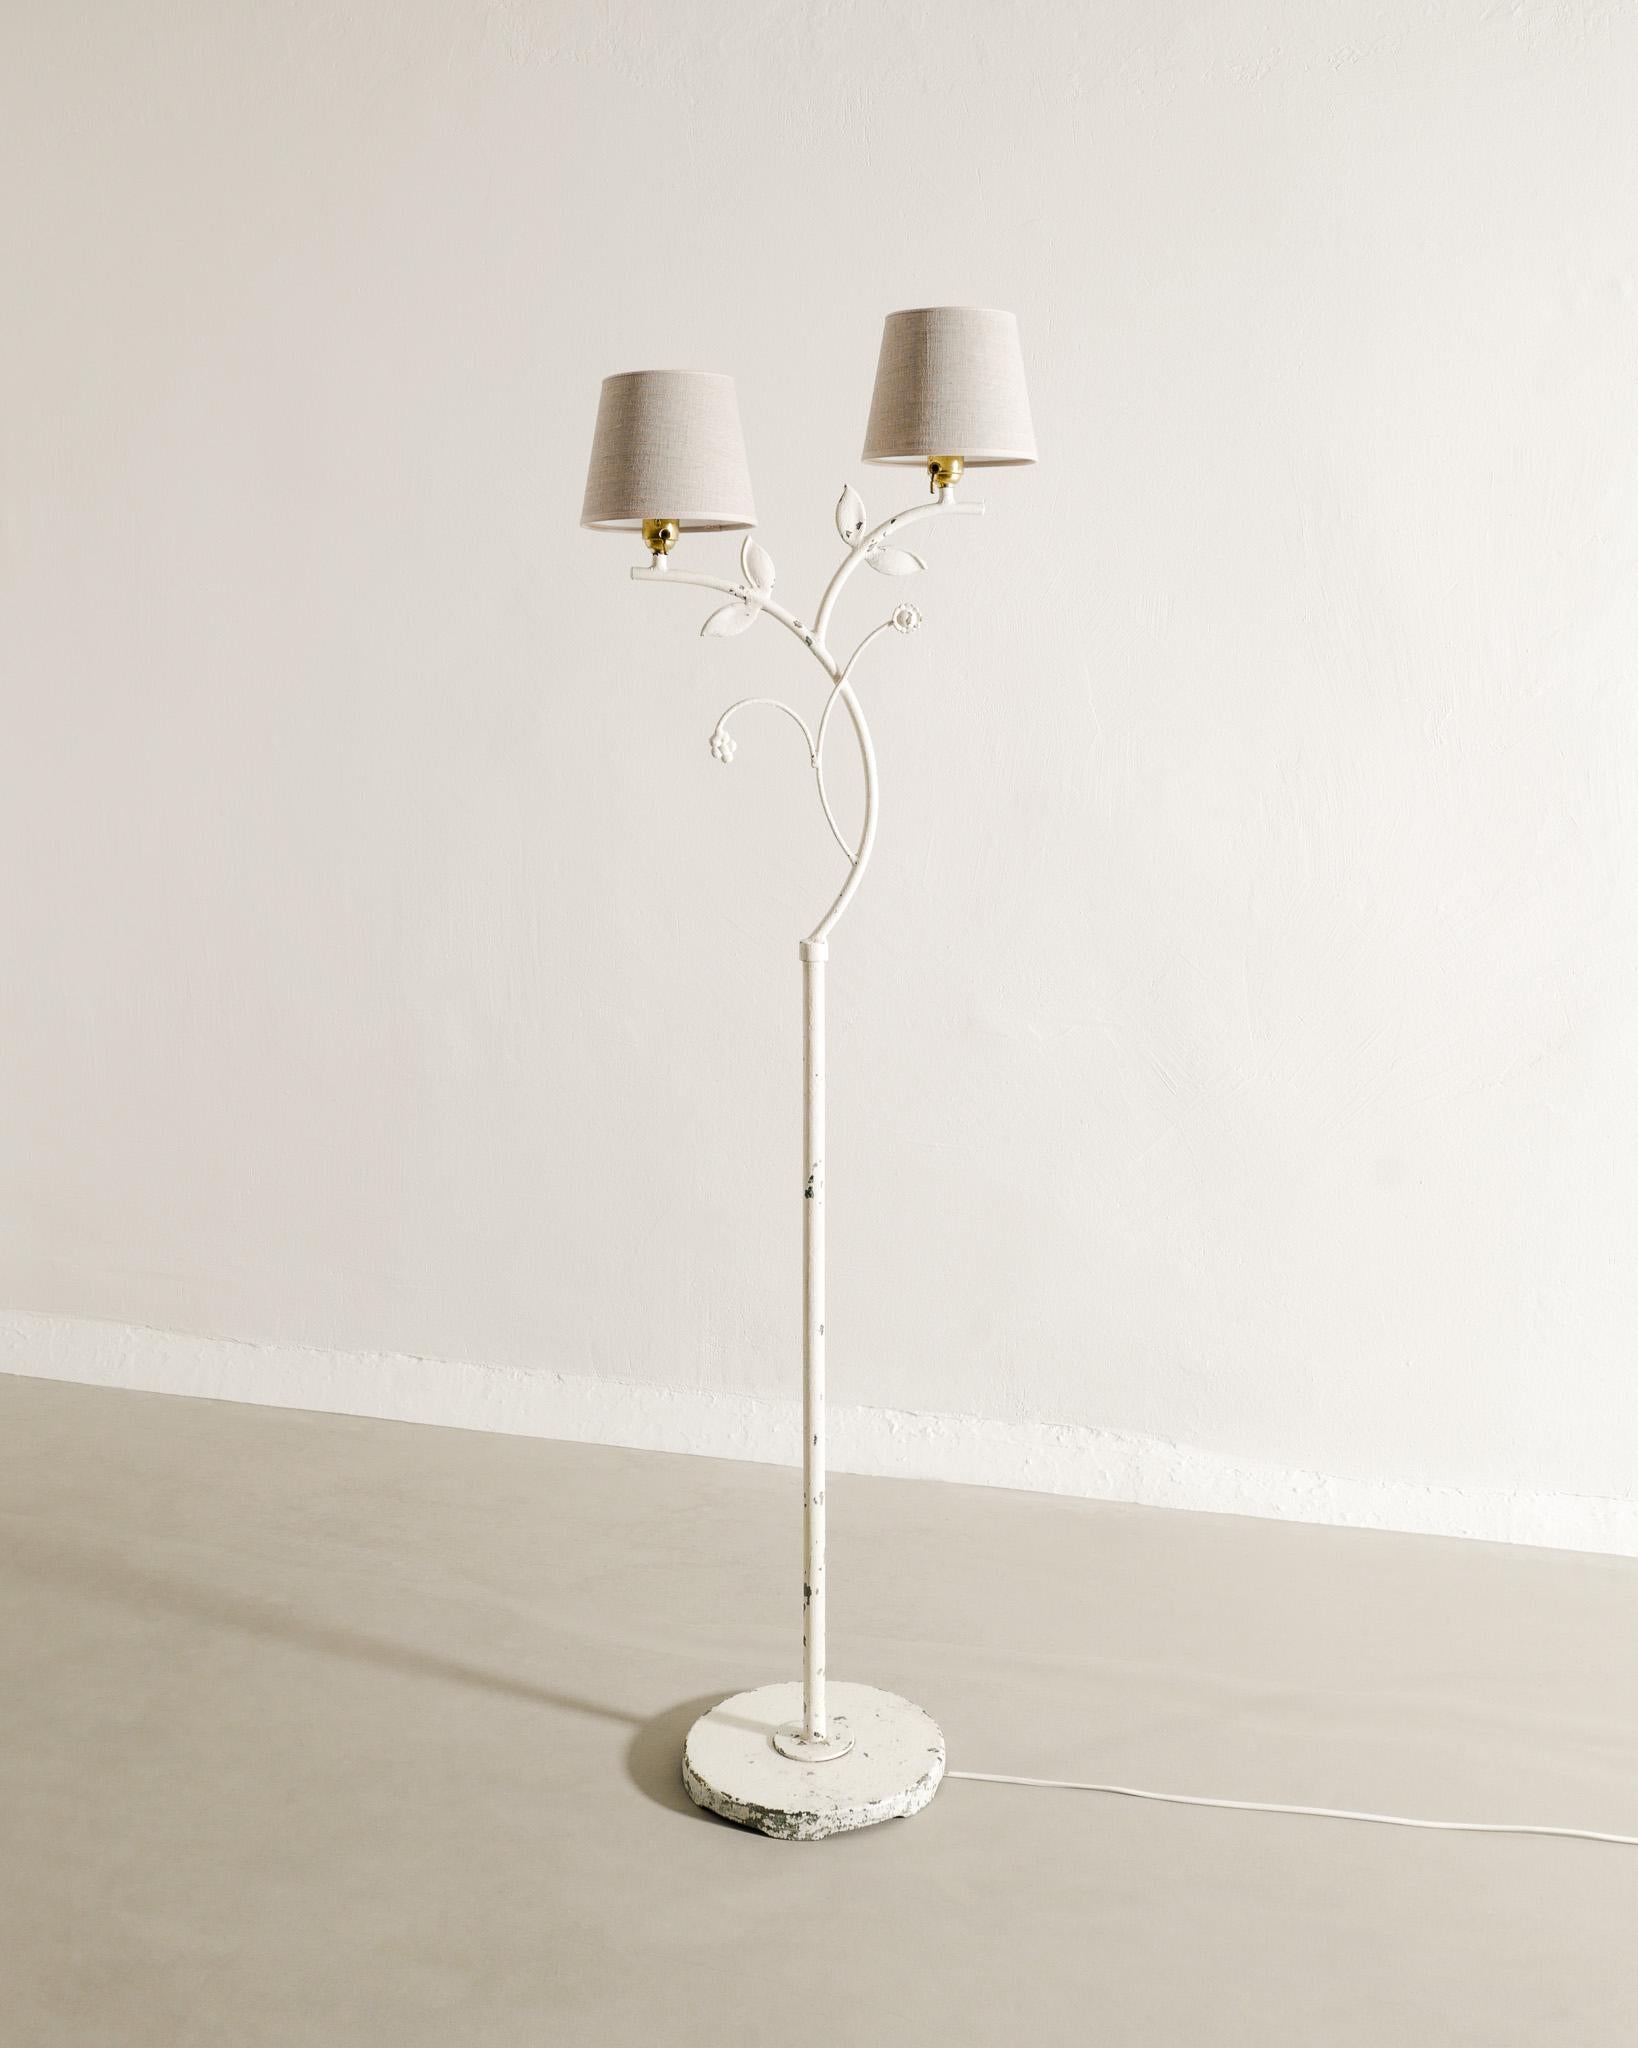 Very rare Swedish mid century floor lamp in white painted metal and brass produced by Bjerkås Armatur in Sweden, 1940s. In good vintage condition. 

Dimensions: H: 145 cm / 57